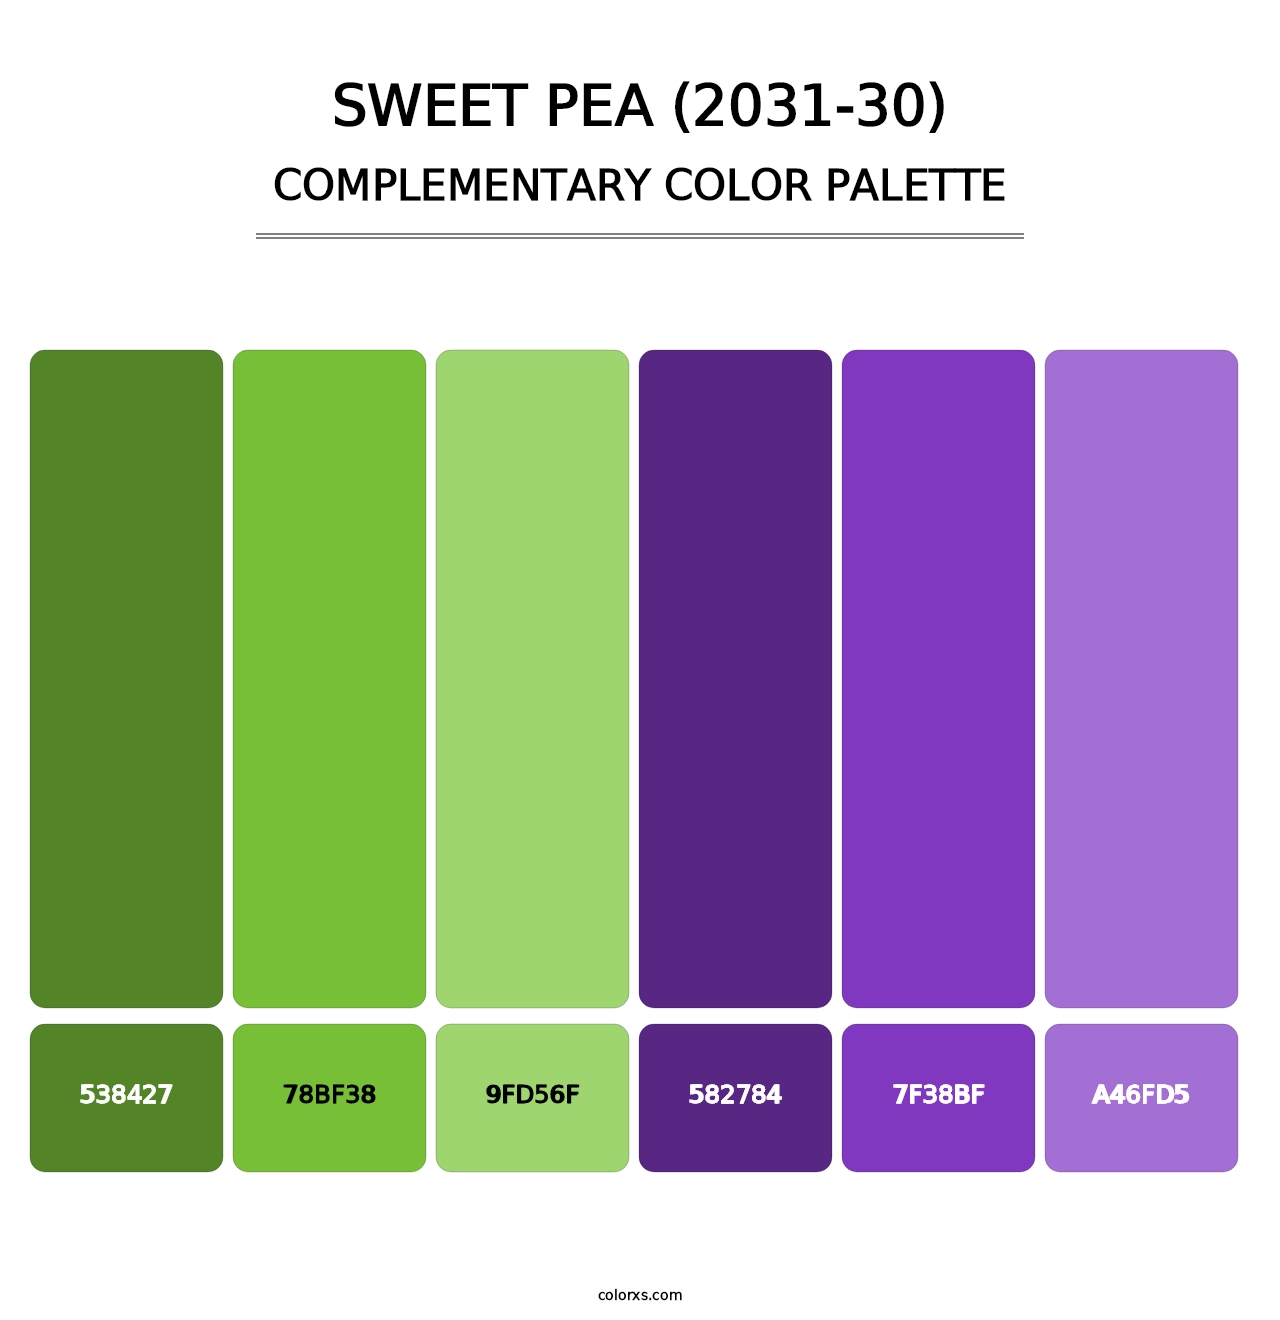 Sweet Pea (2031-30) - Complementary Color Palette